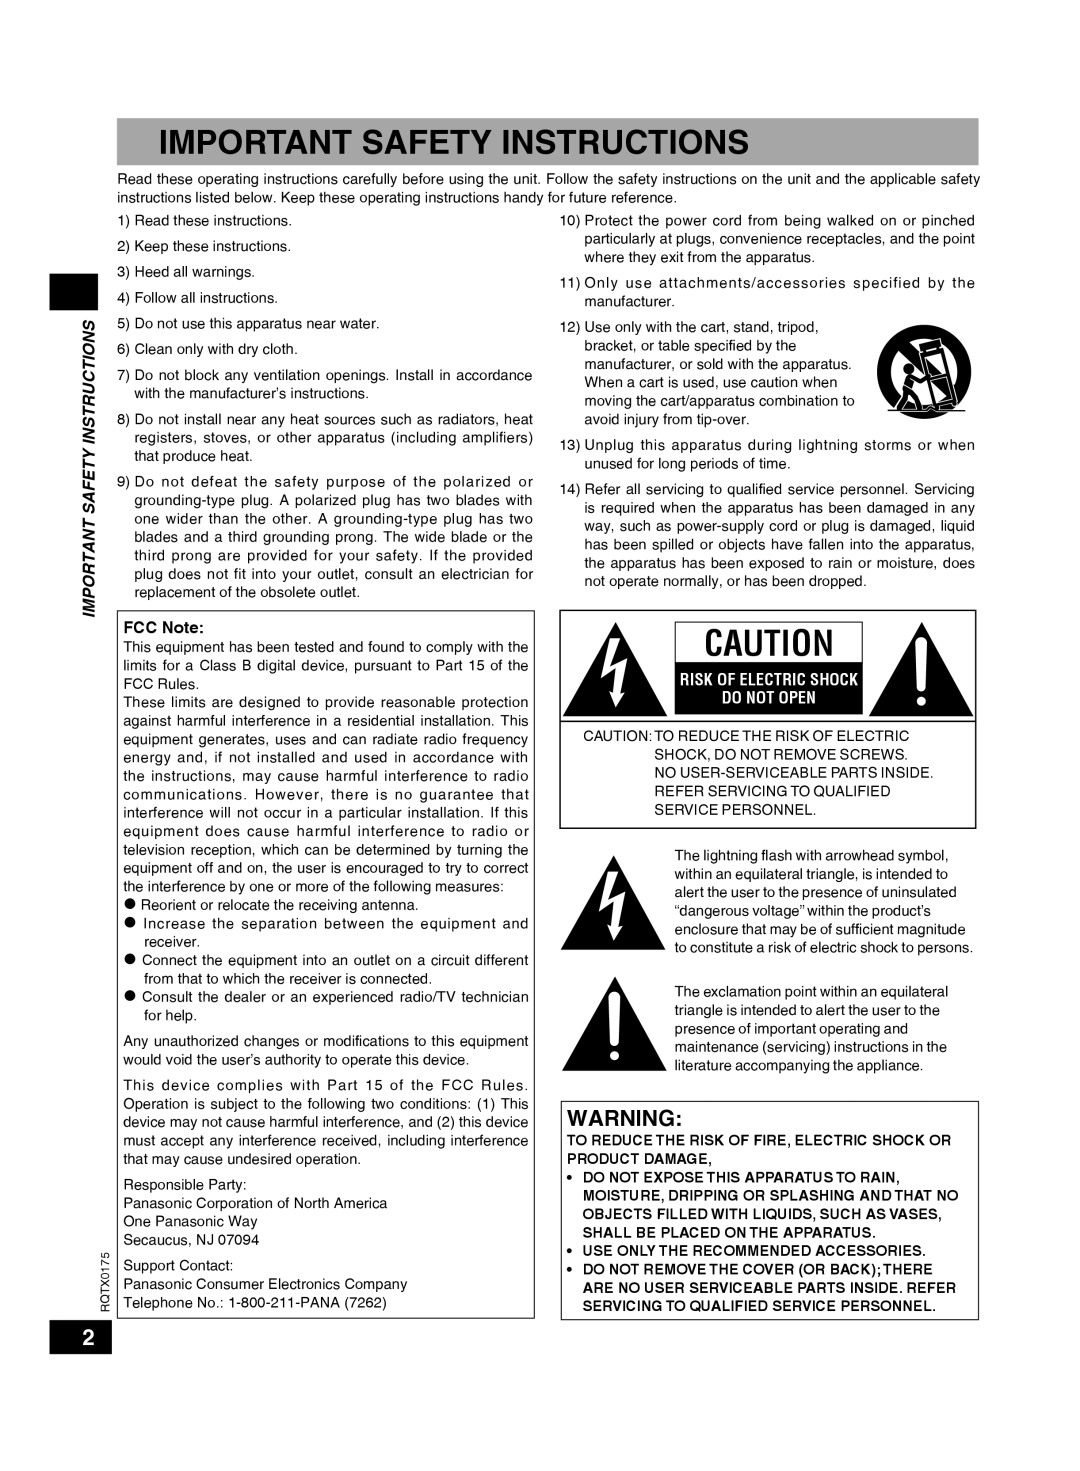 Panasonic SCHT56 operating instructions Important Safety Instructions, Risk Of Electric Shock Do Not Open 